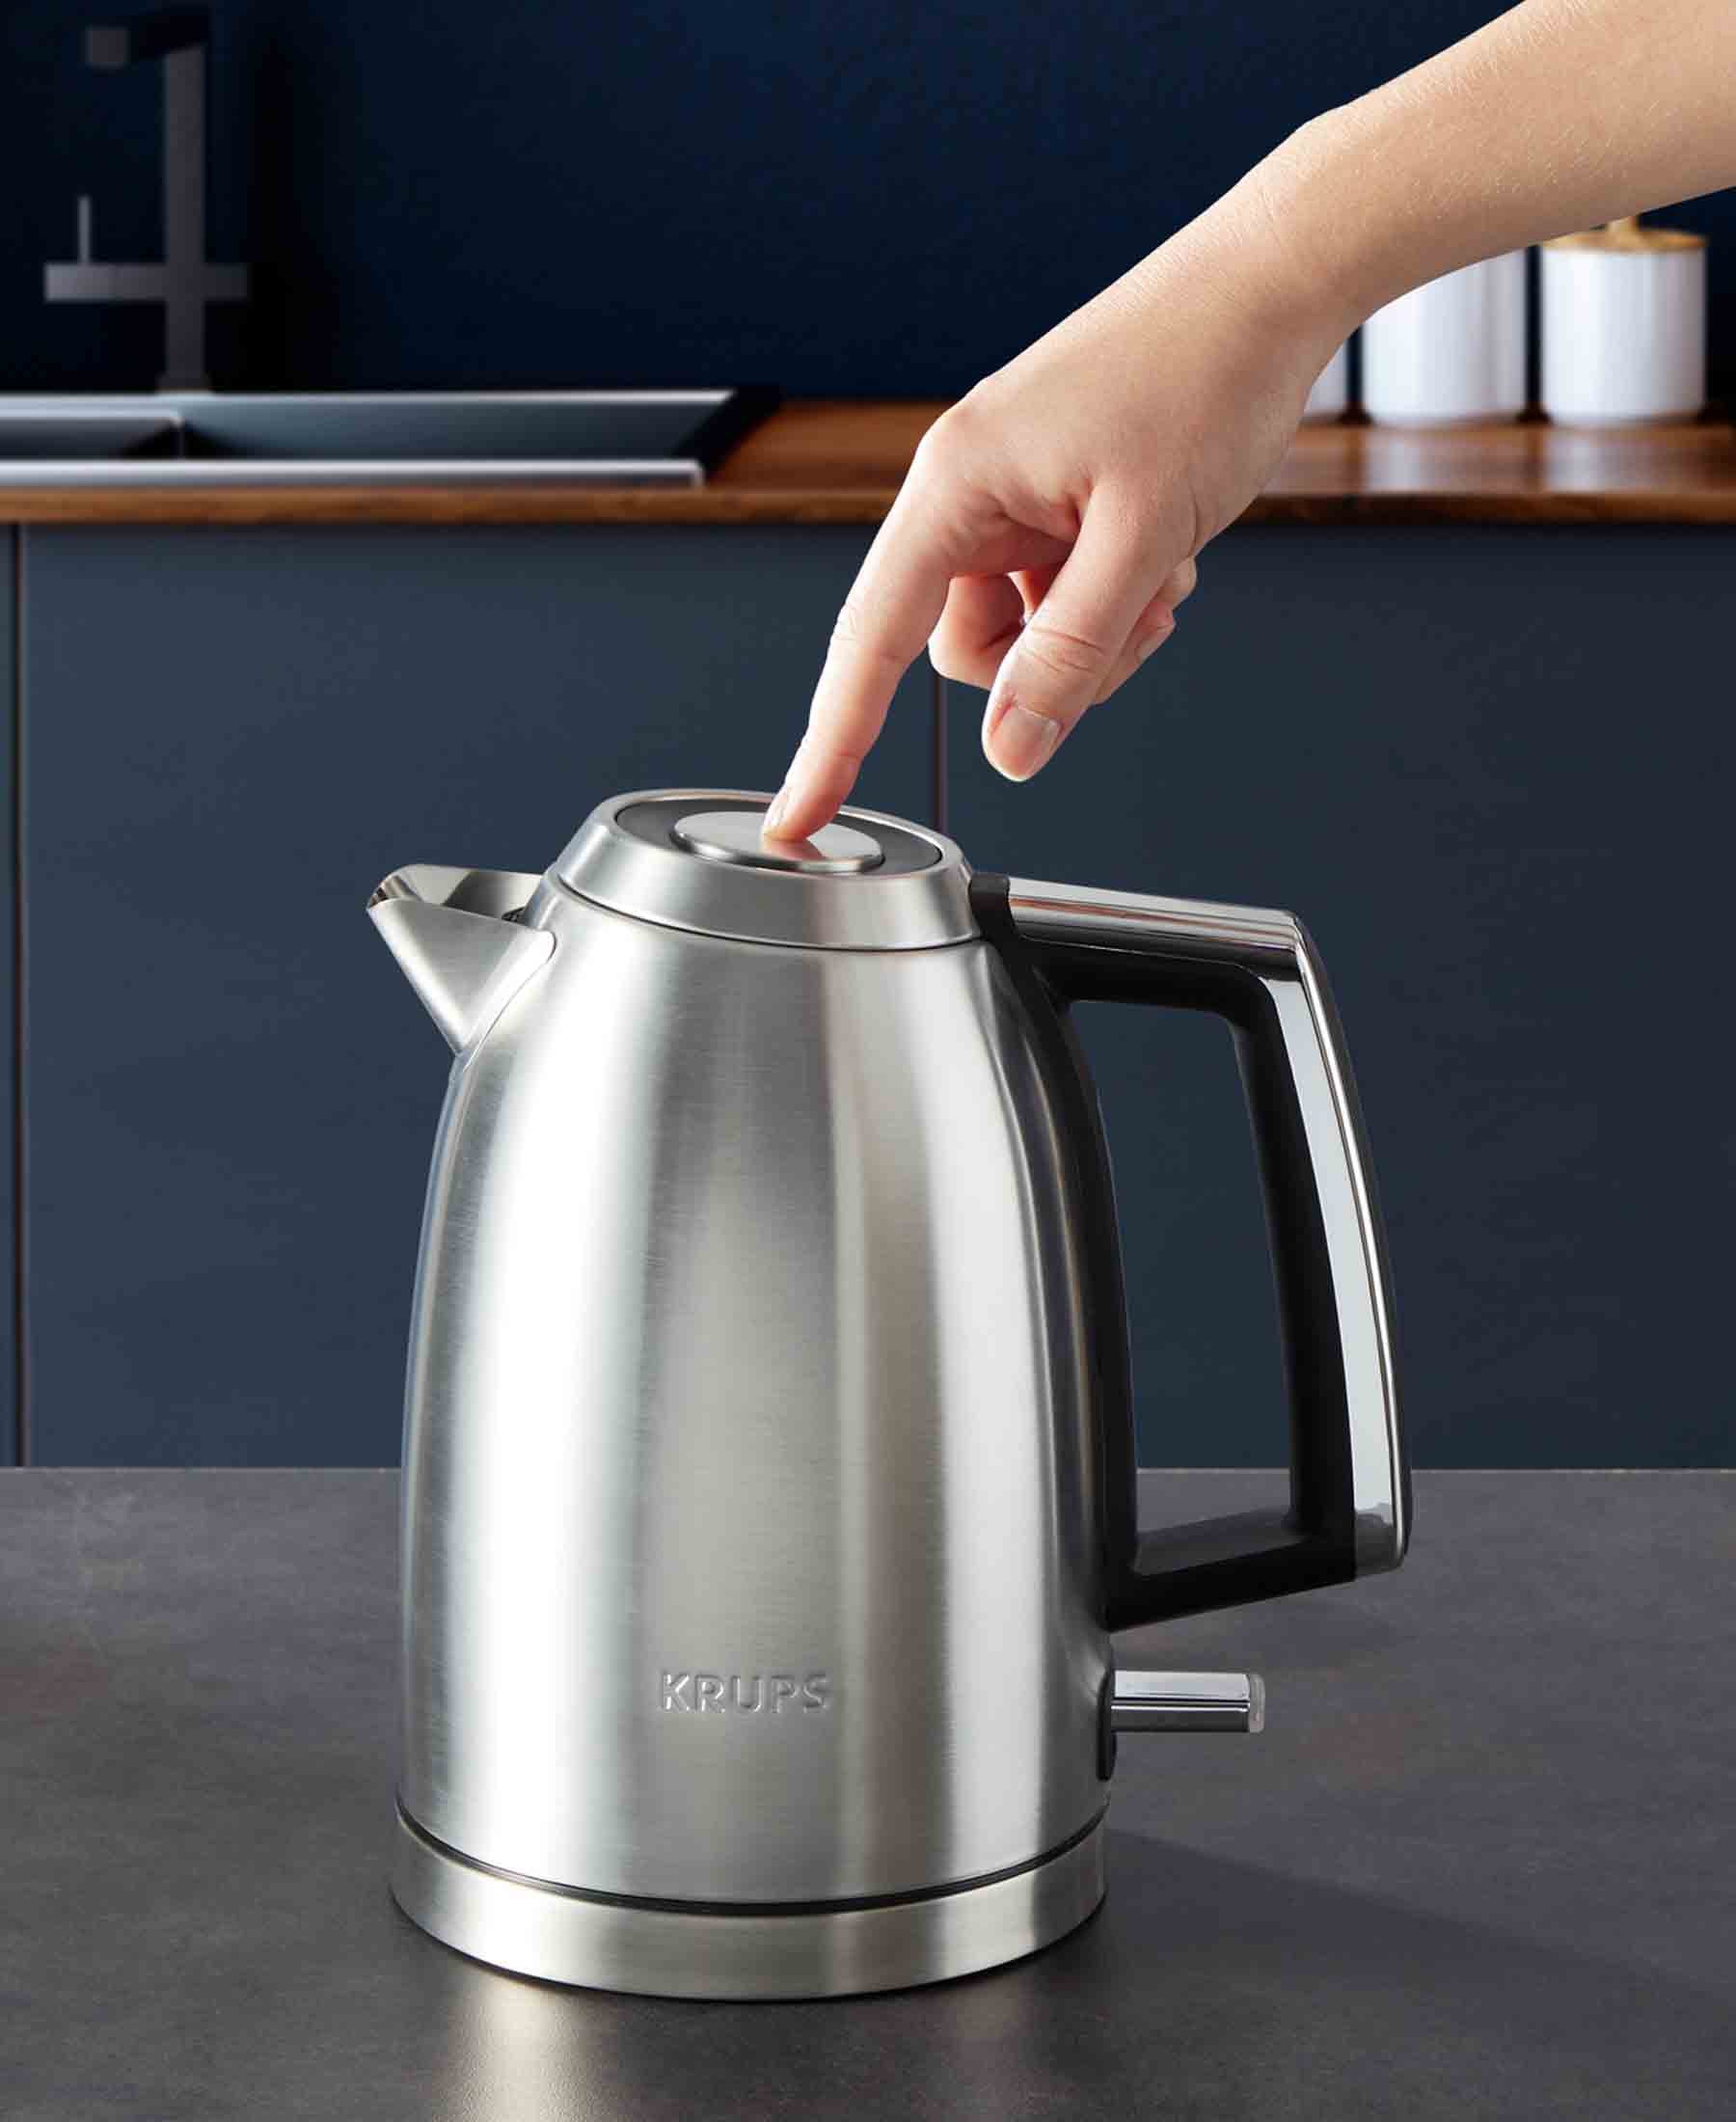 Krups Excellence 1.7L Cordless 360° Stainless Steel Kettle - Silver